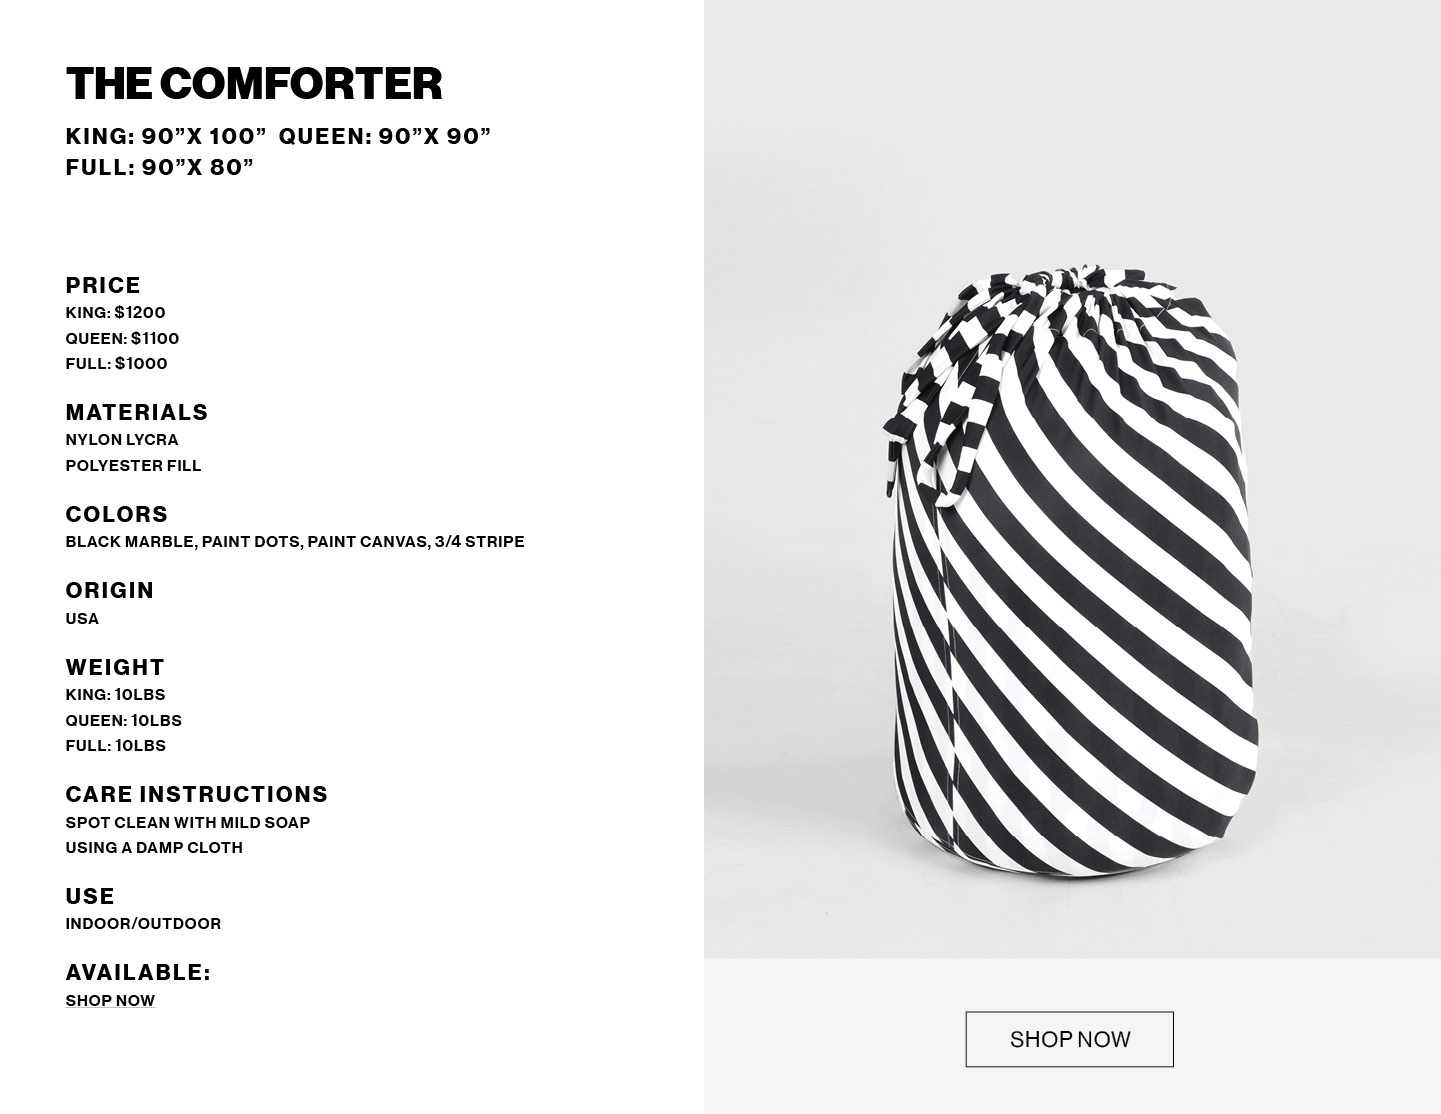 The Comforter product info